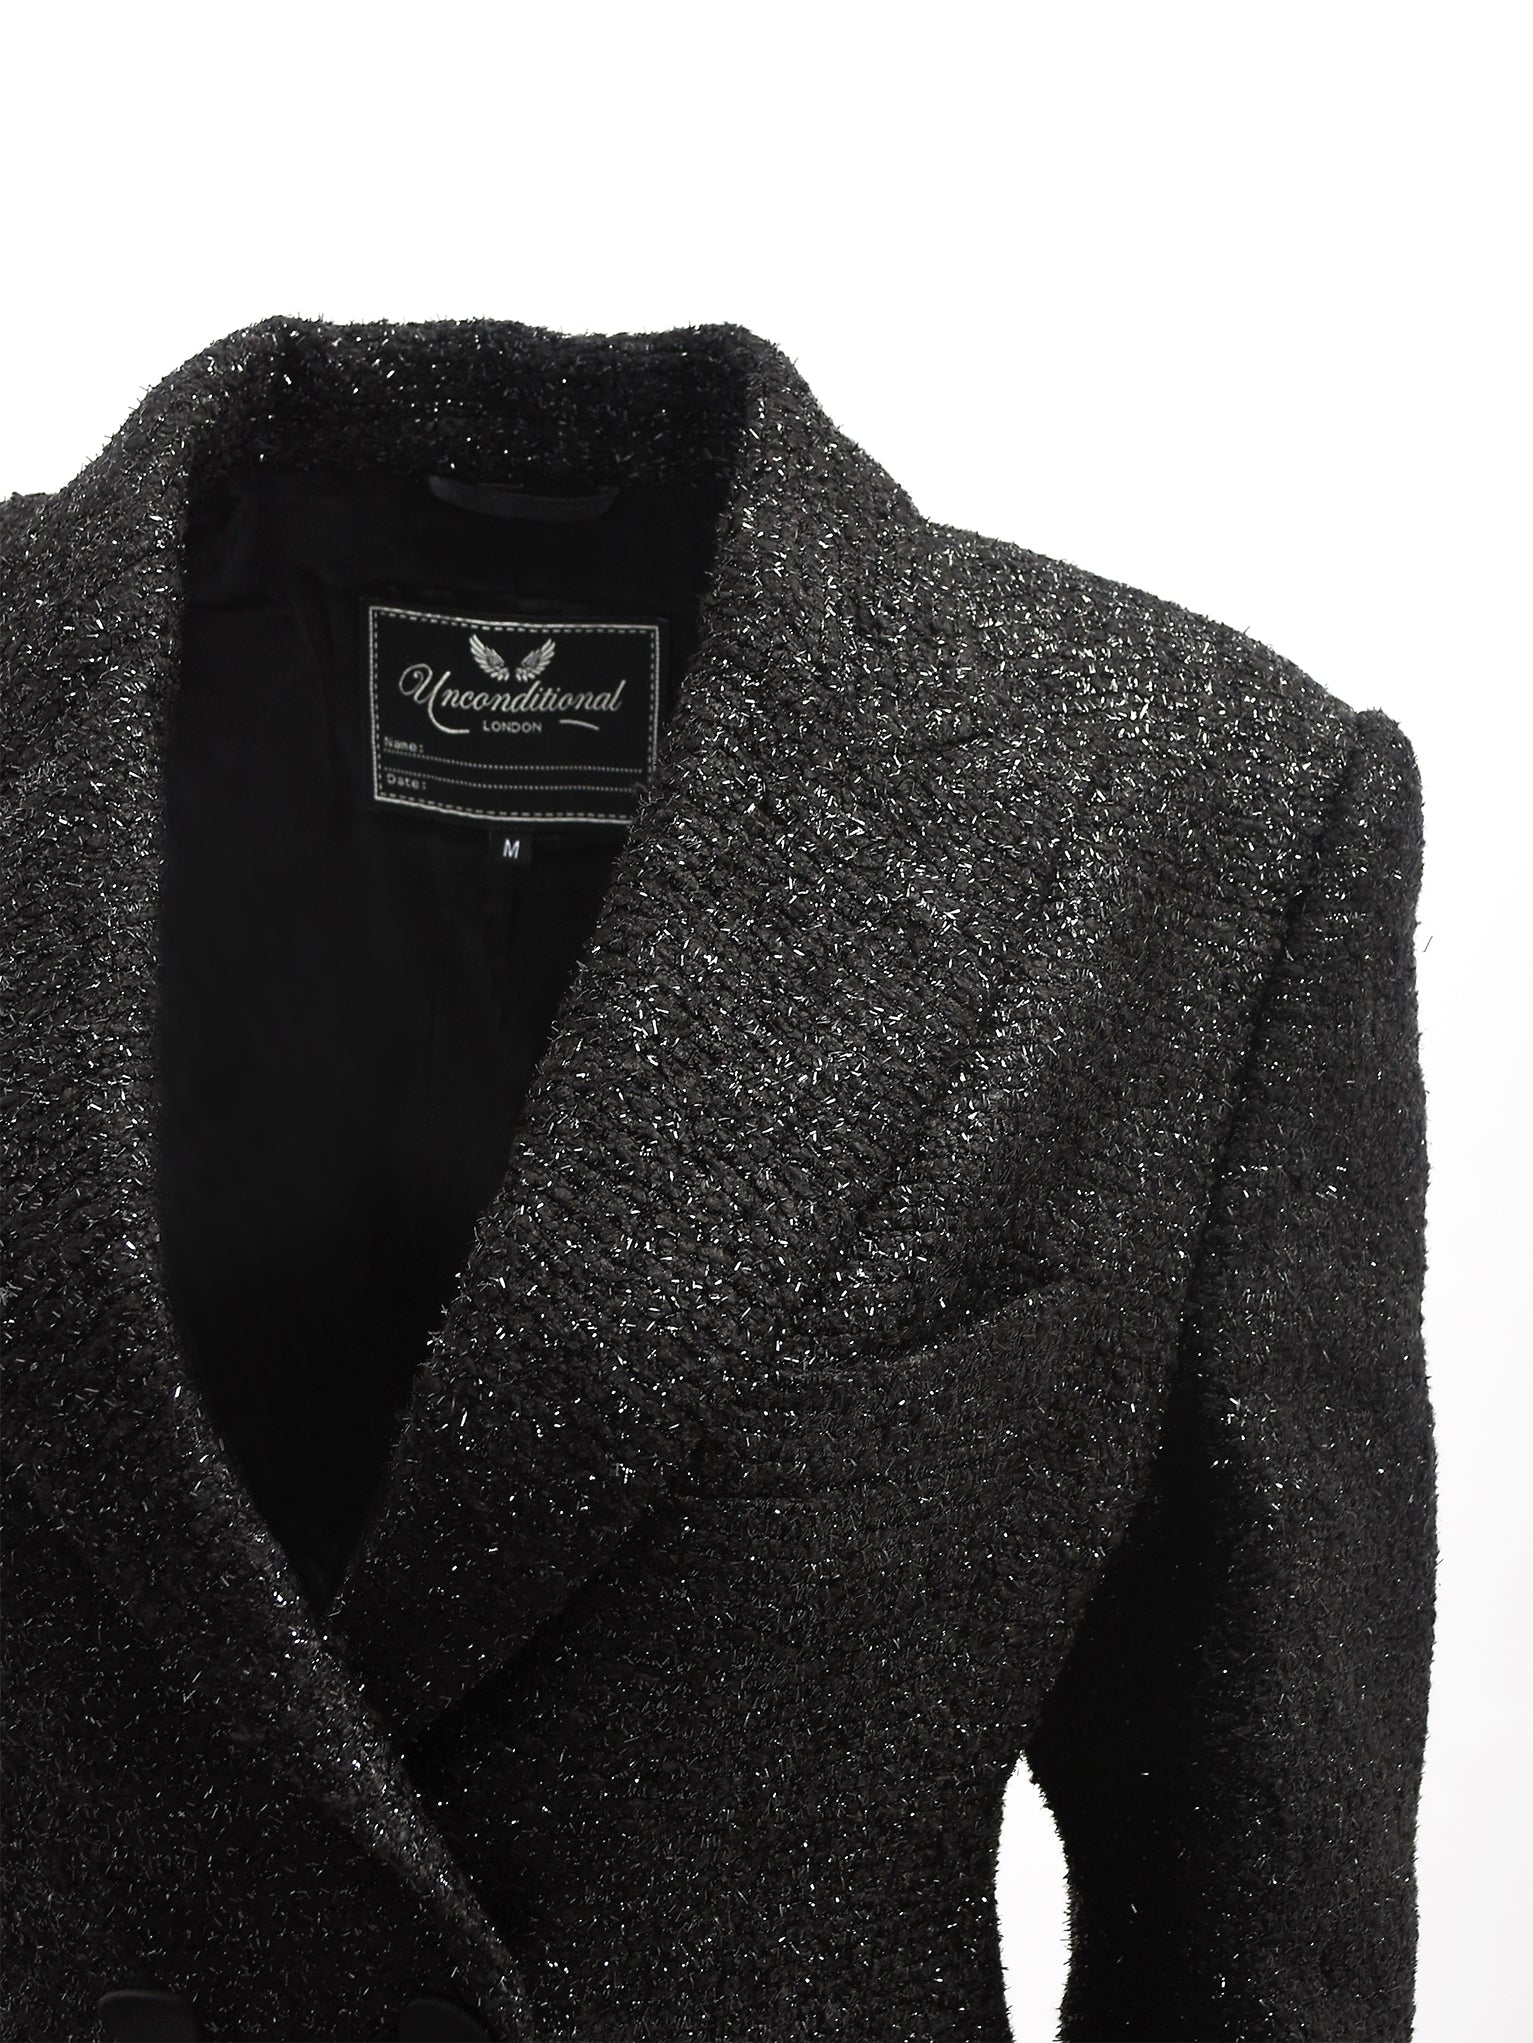 BLACK DRESS COAT WITH SPARKLING WOOL FABRIC